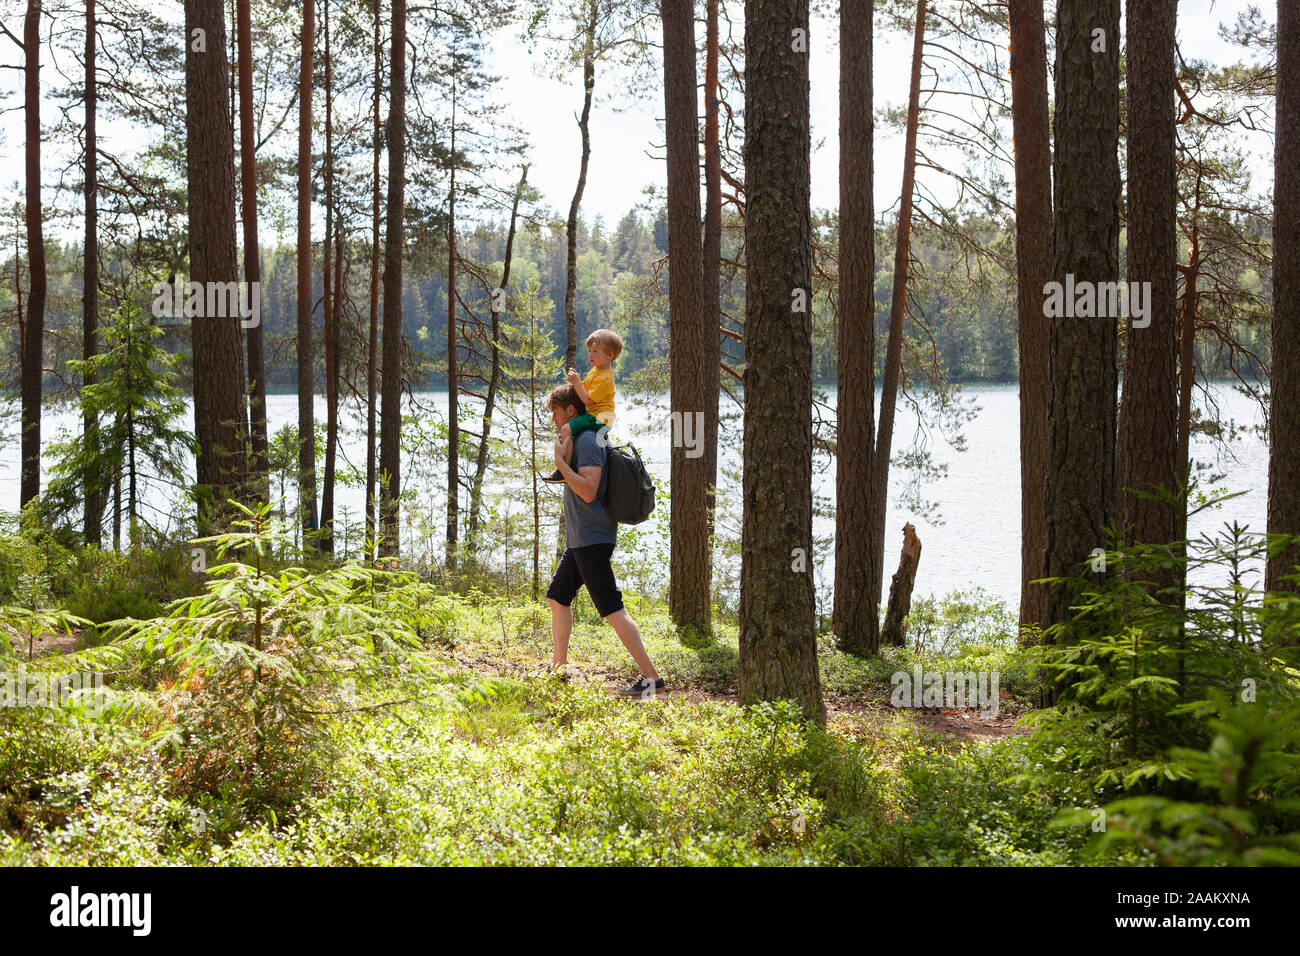 Father giving son piggyback ride in forest, Finland Stock Photo